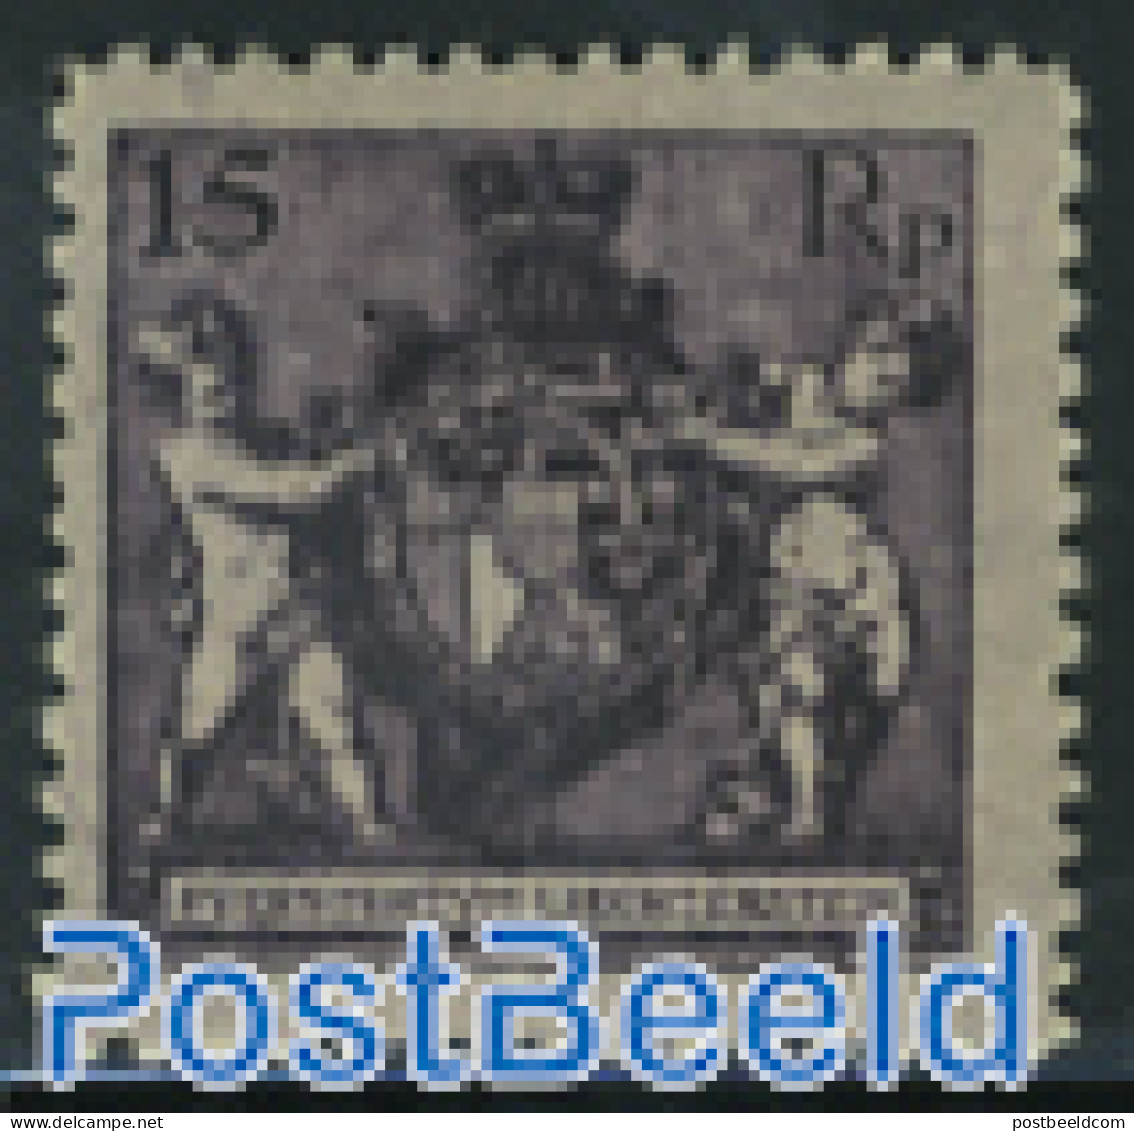 Liechtenstein 1921 15Rp, Perf. 12.5, Stamp Out Of Set, Unused (hinged), History - Coat Of Arms - Neufs